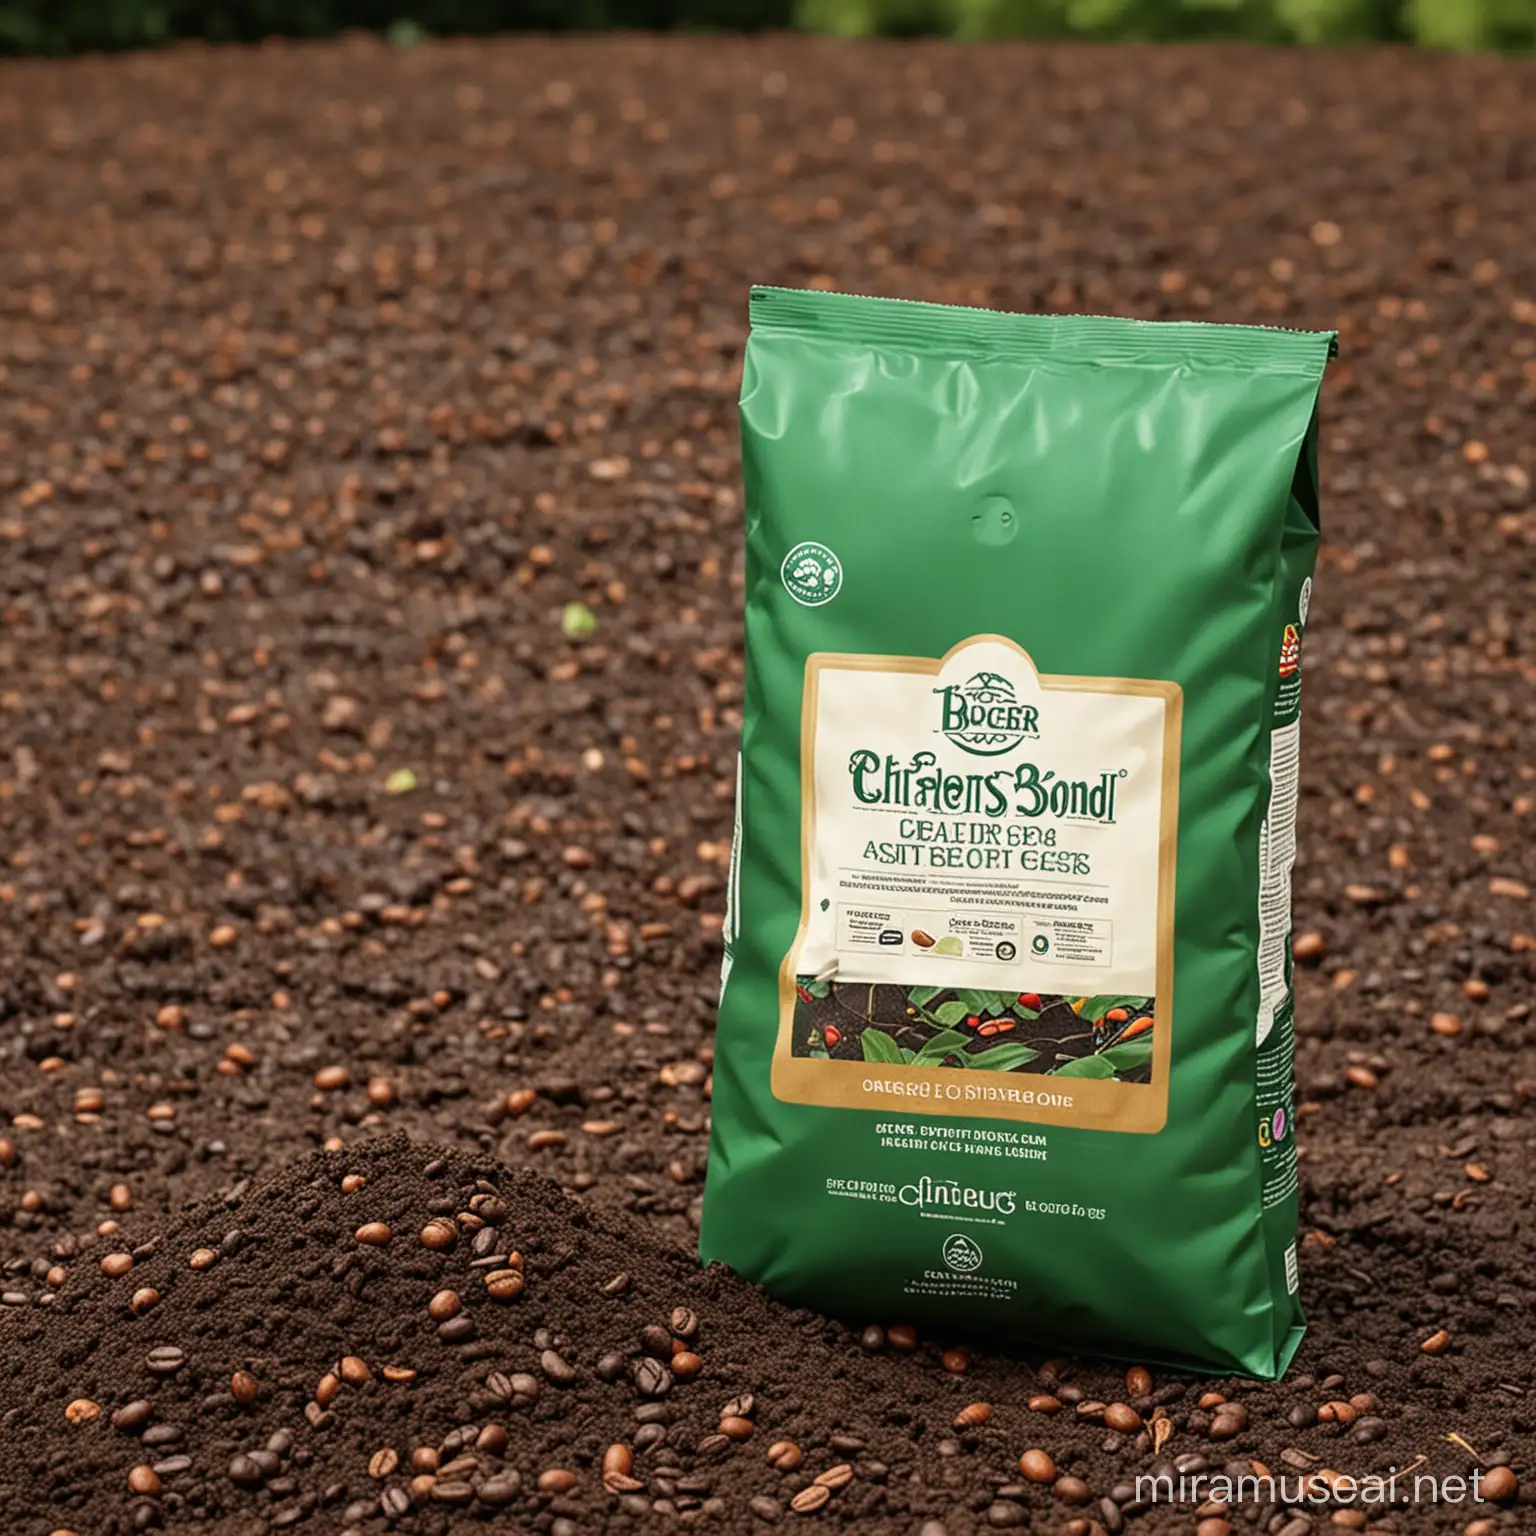 creates a product for bayer called effectsor, whose main ingredients are coffee pond and tea compost